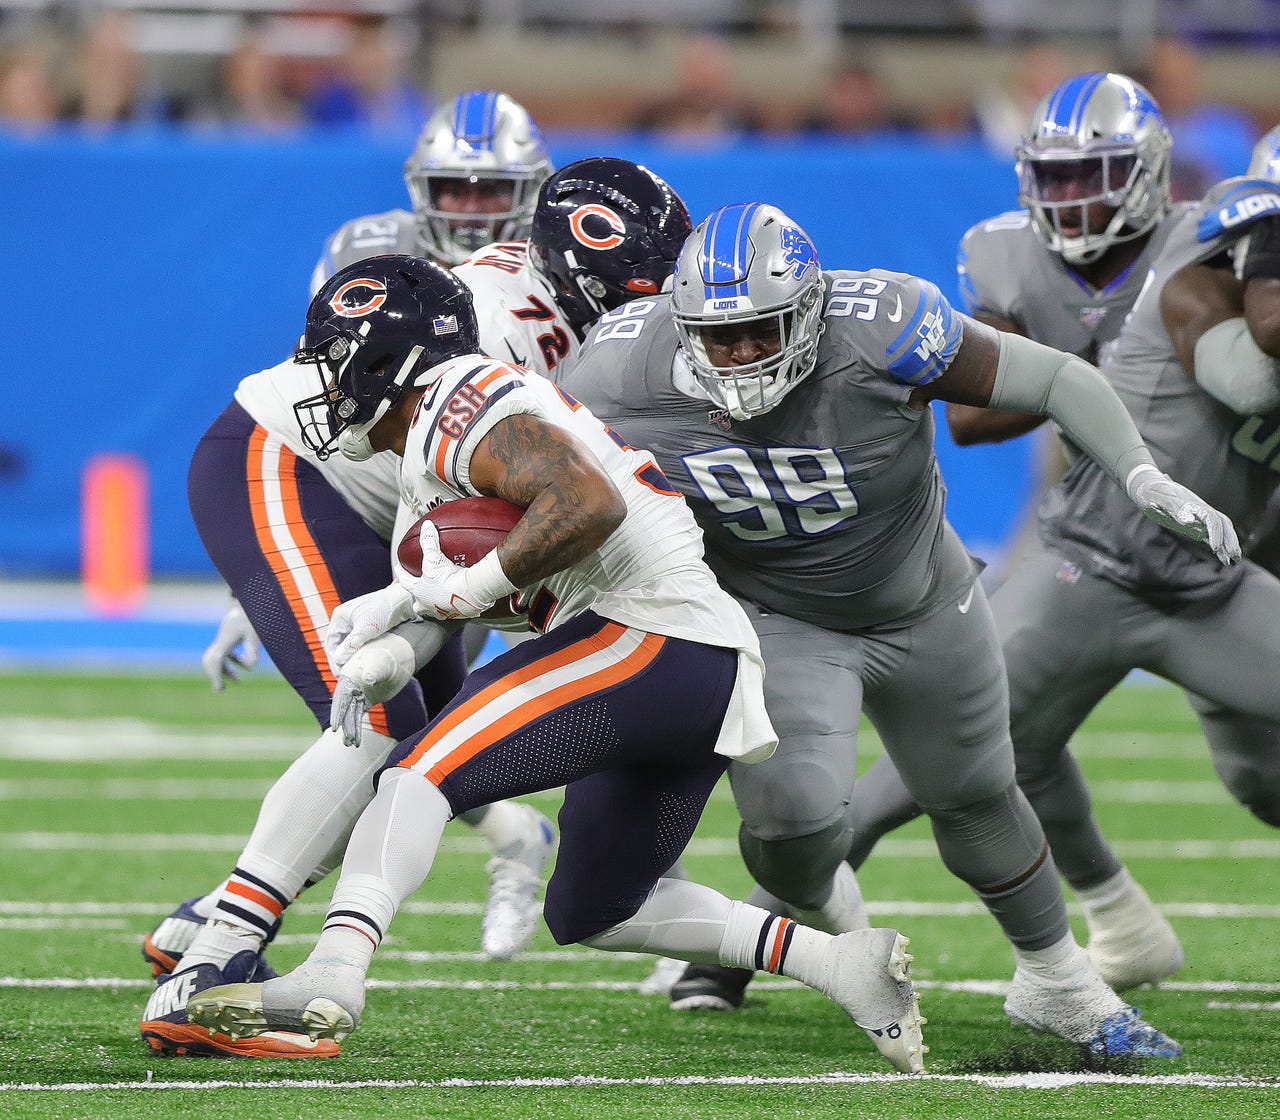 Detroit Lions defensive tackle John Atkins (99) tackles Chicago Bears running back David Montgomery during the first half Thursday, Nov. 28, 2019 at Ford Field.